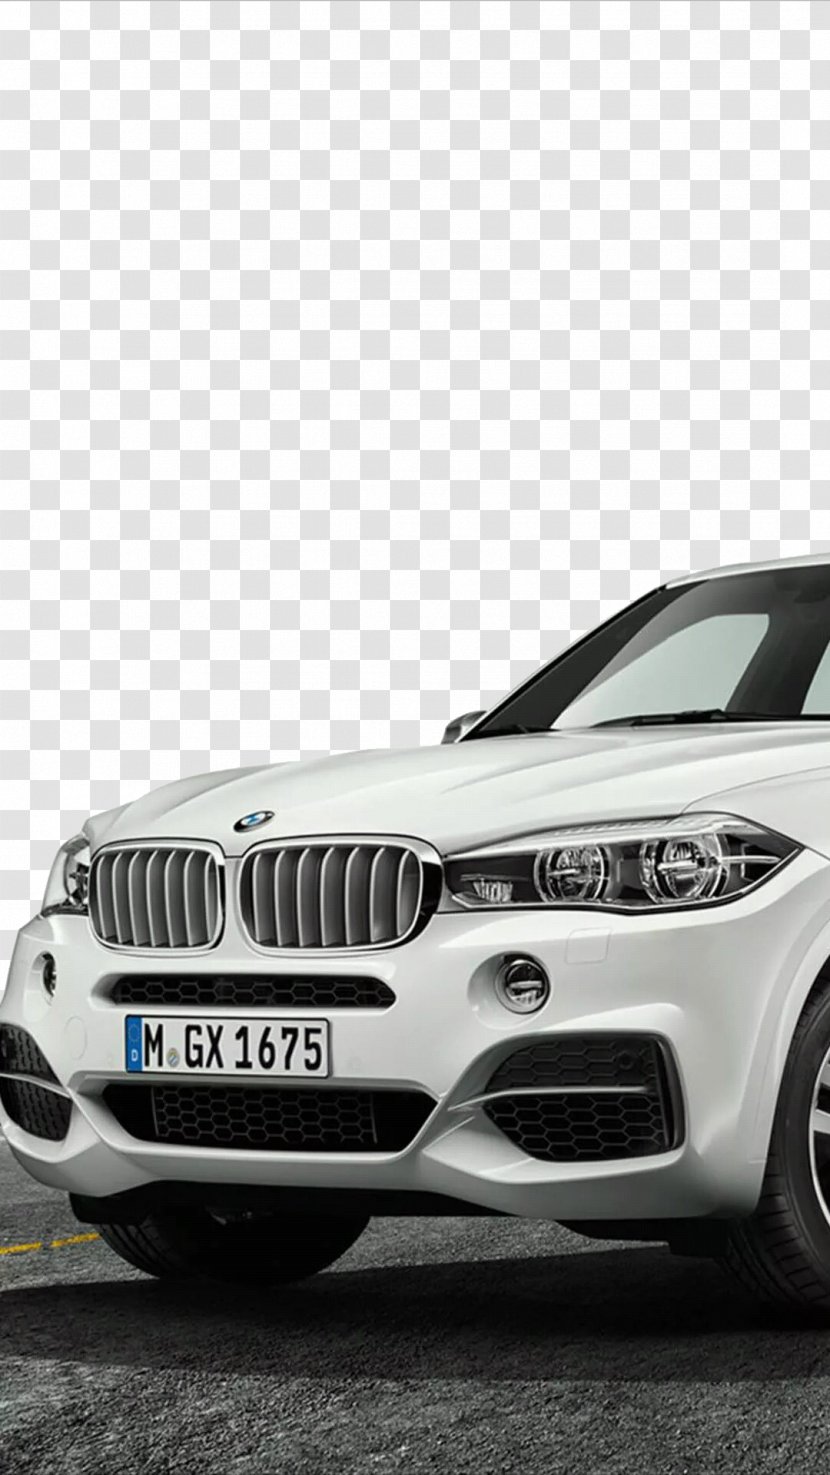 2014 BMW X5 2016 2015 Sport Utility Vehicle - Grille - Business Car White Transparent PNG